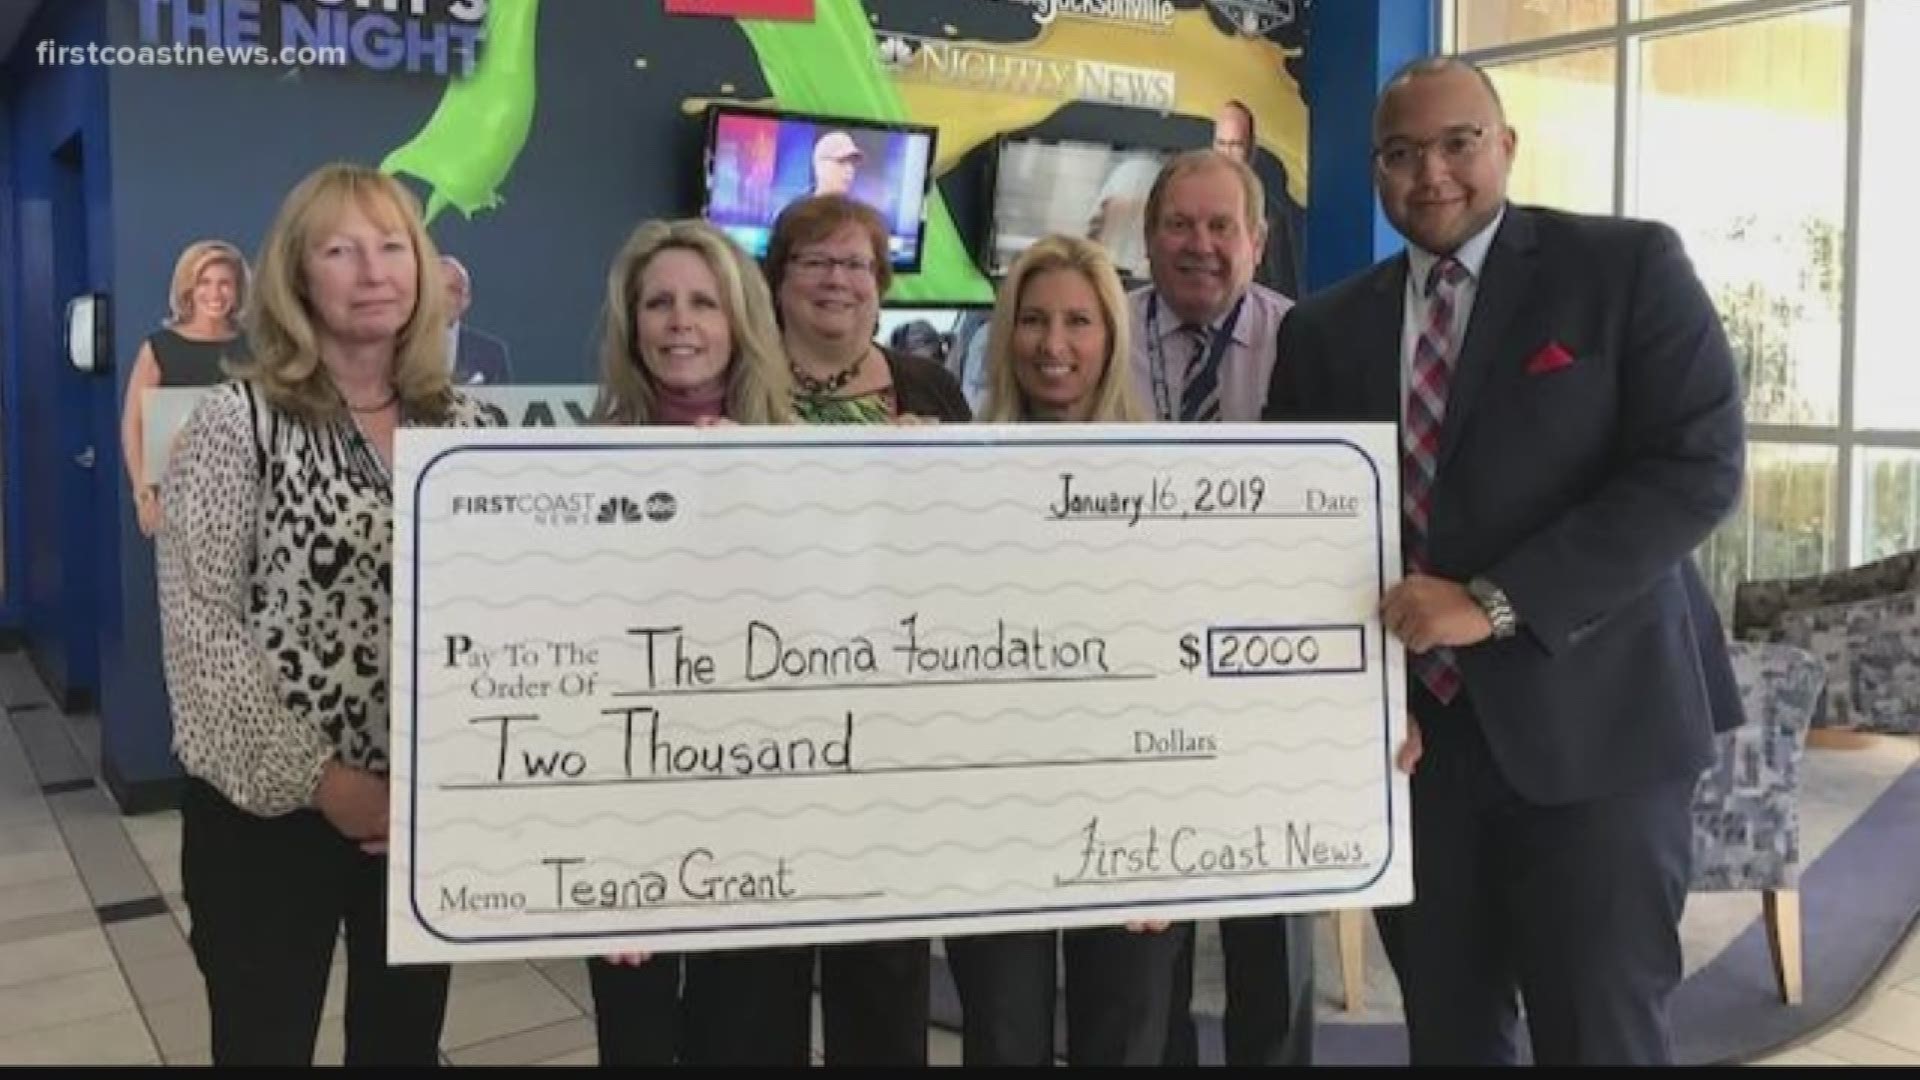 The TEGNA Foundation and First Coast News donated $ 2,000 to the Donna Foundation. The Donna Foundation provides financial assistance to those living with breast cancer.